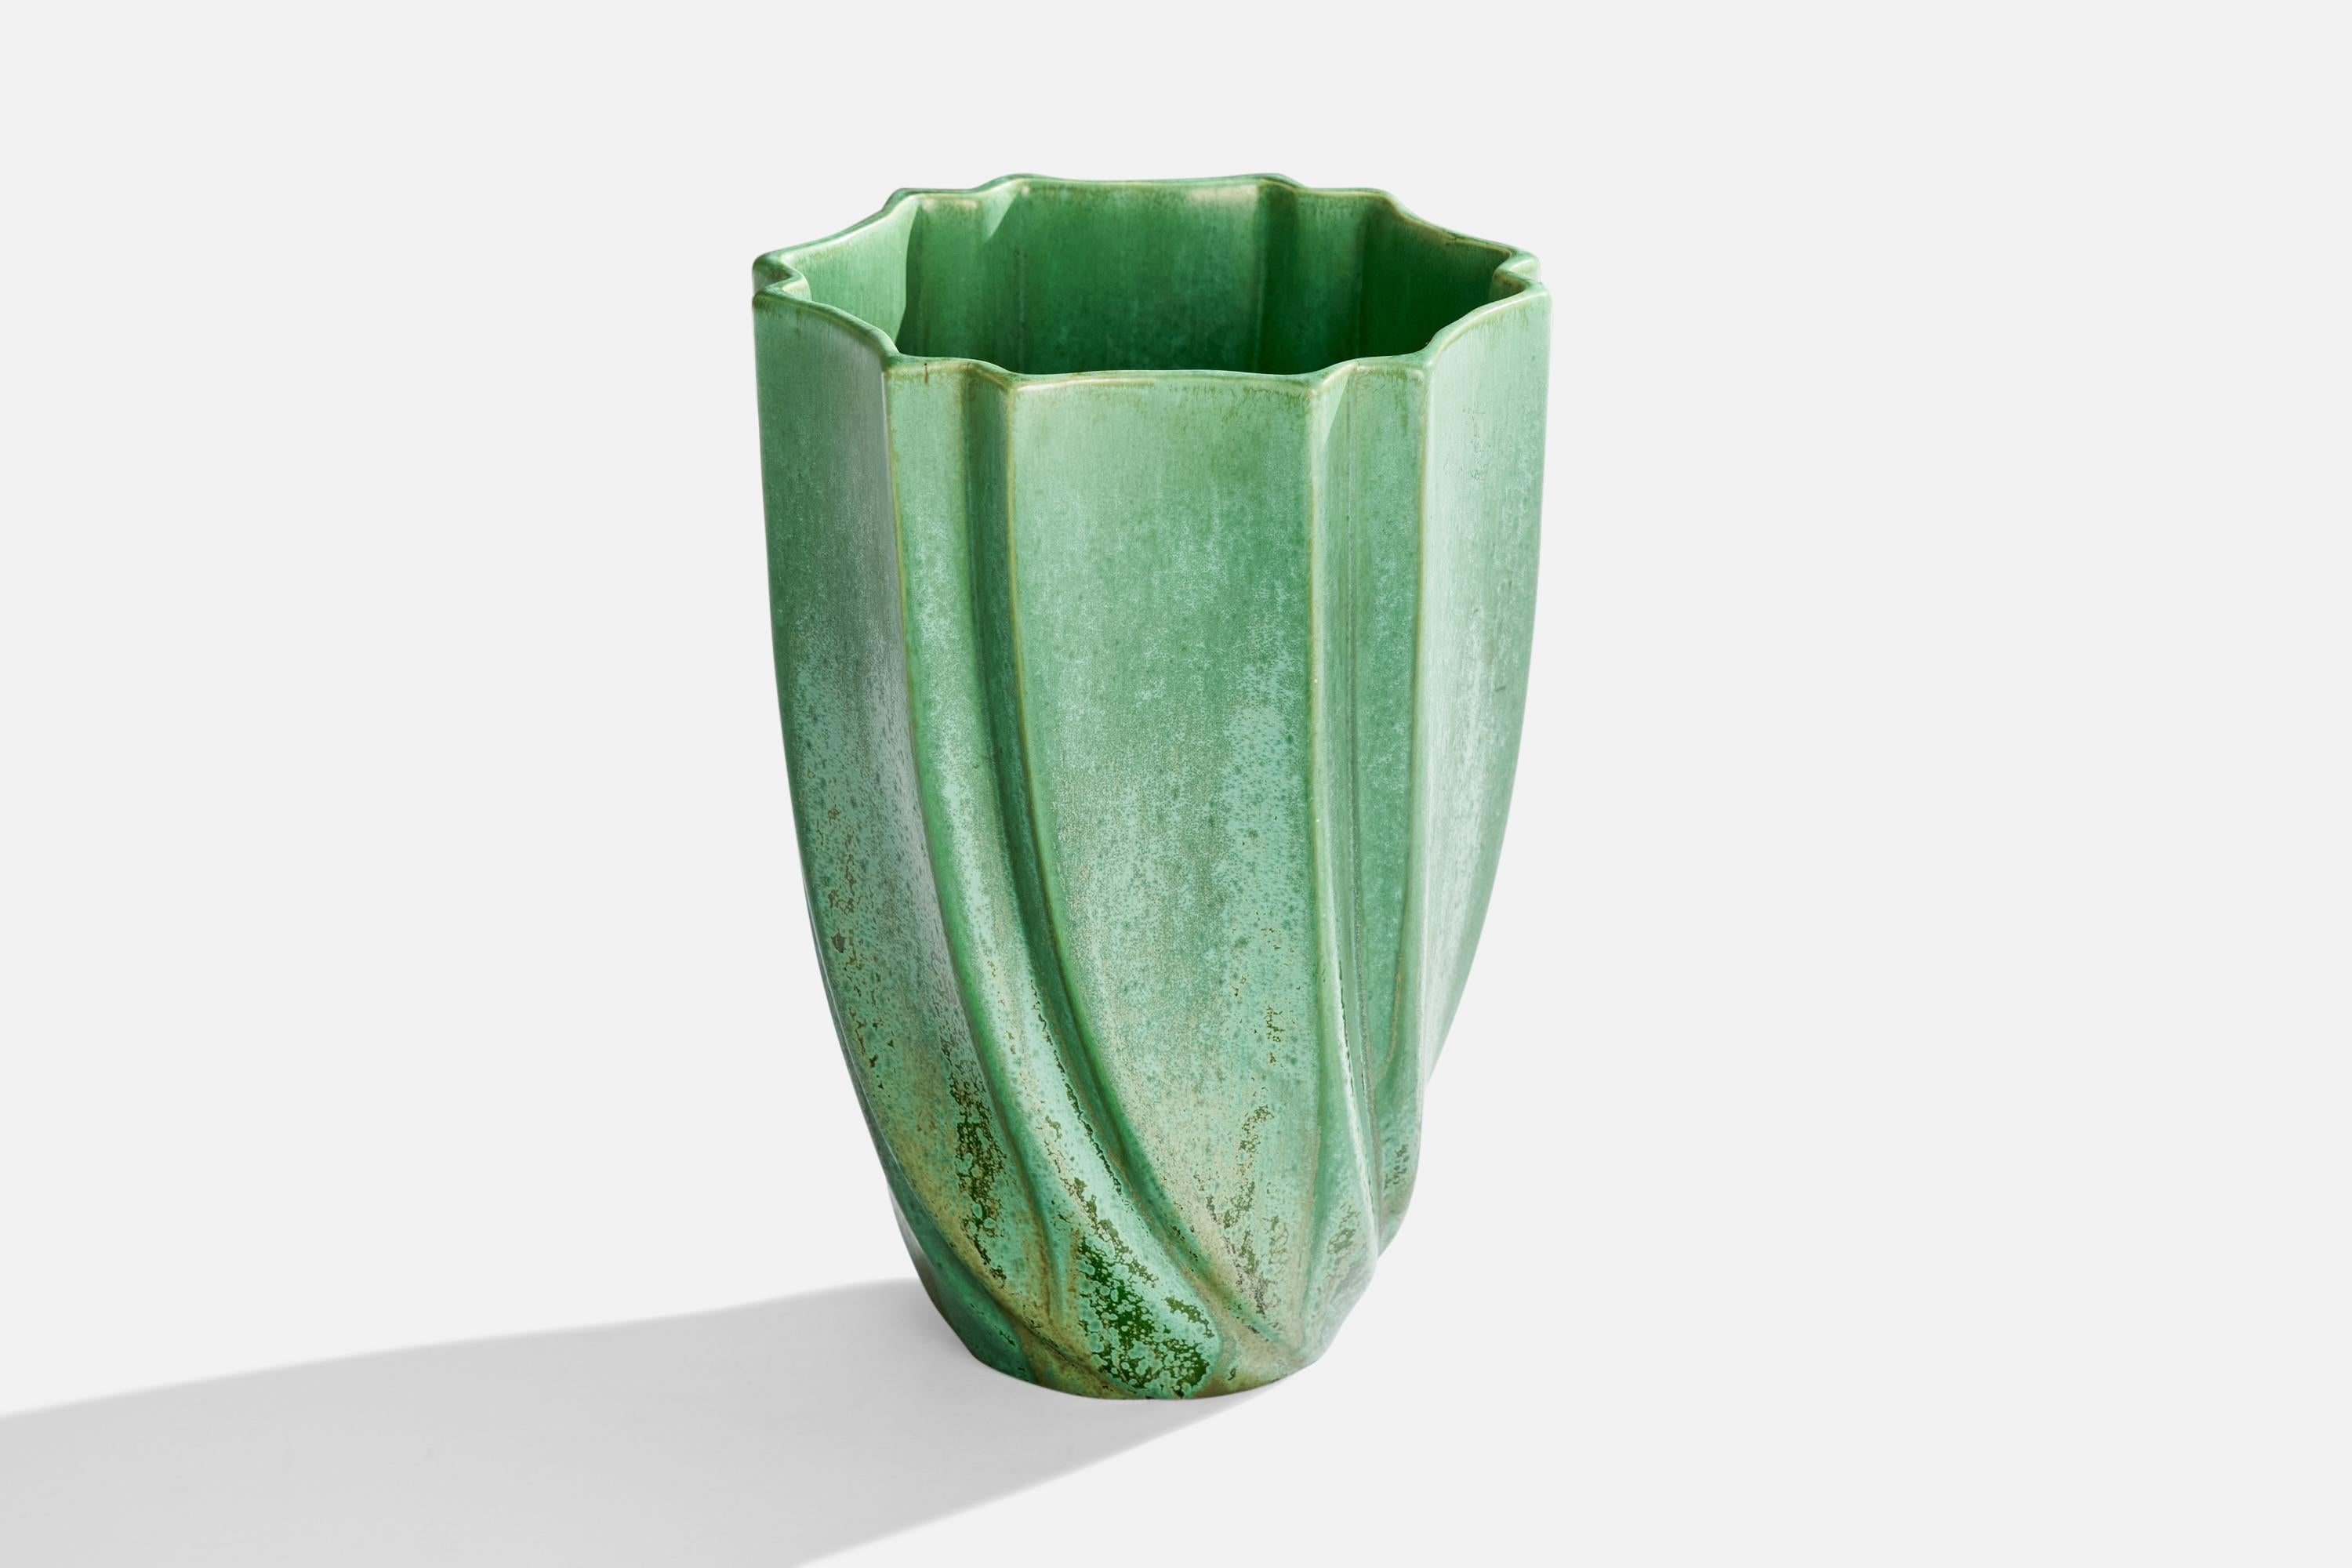 A green-glazed ceramic vase designed by Arthur Percy and produced by Gefle, Sweden, 1930s.